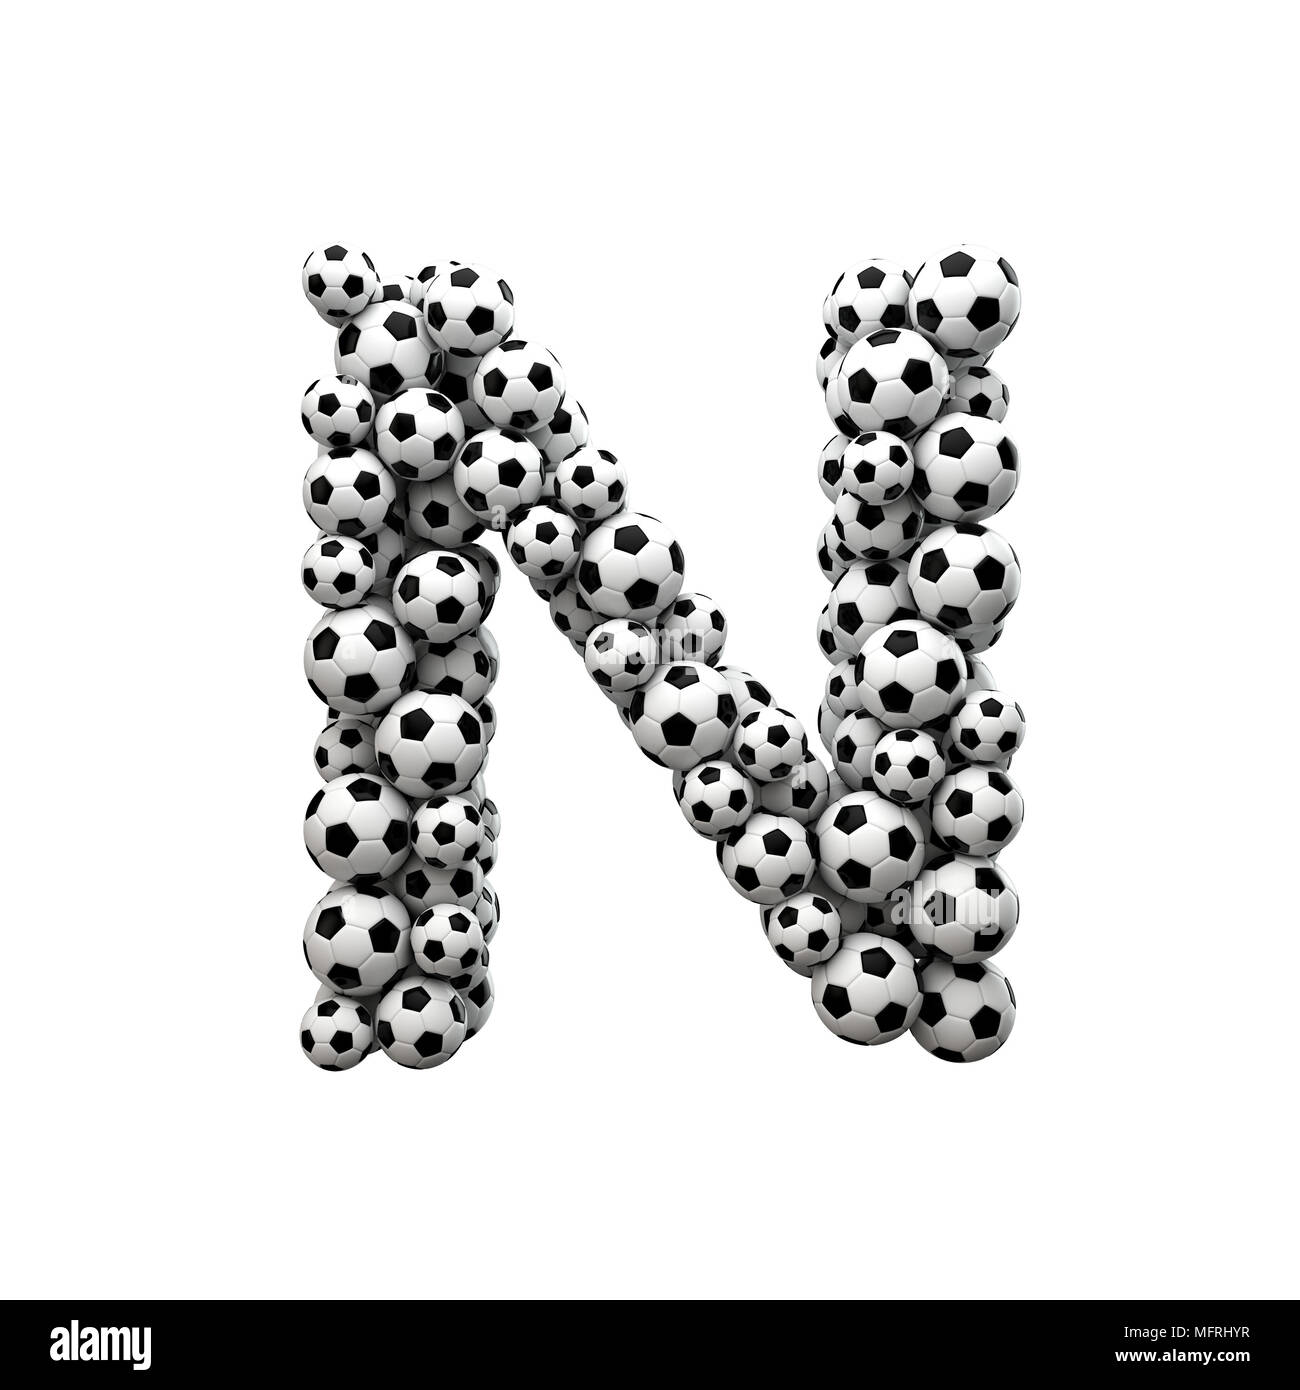 Capital letter N font made from a collection of soccer balls. 3D Rendering Stock Photo